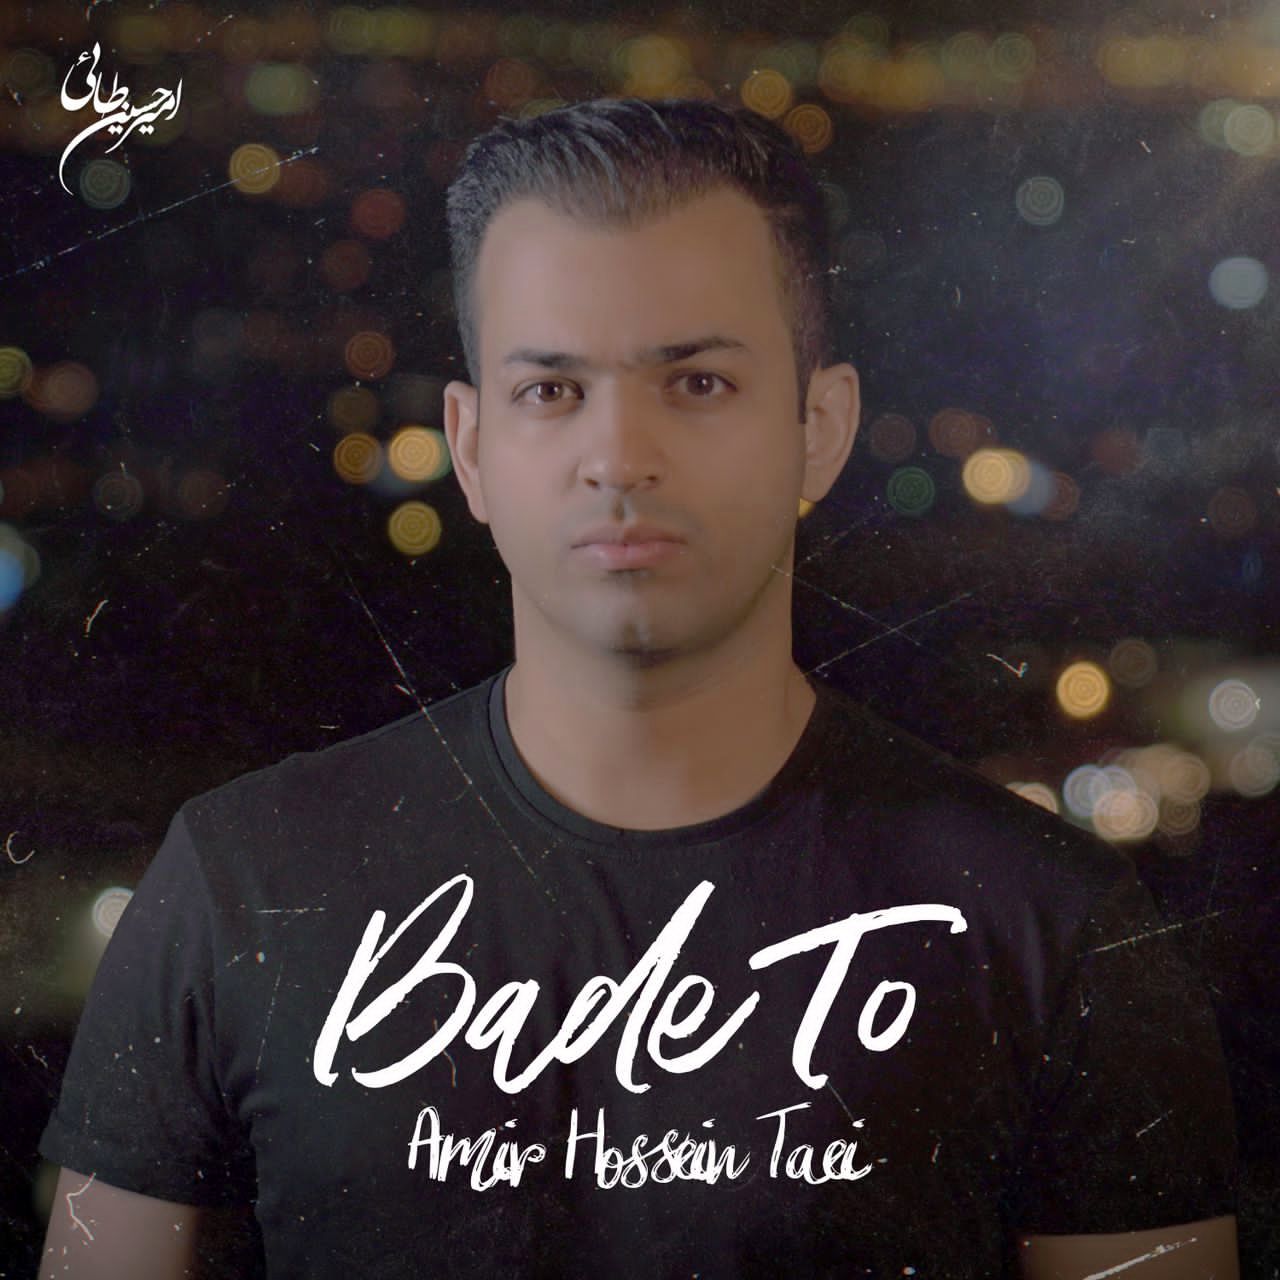 A new song by Amir Hossein Taei called "Bade To" Released